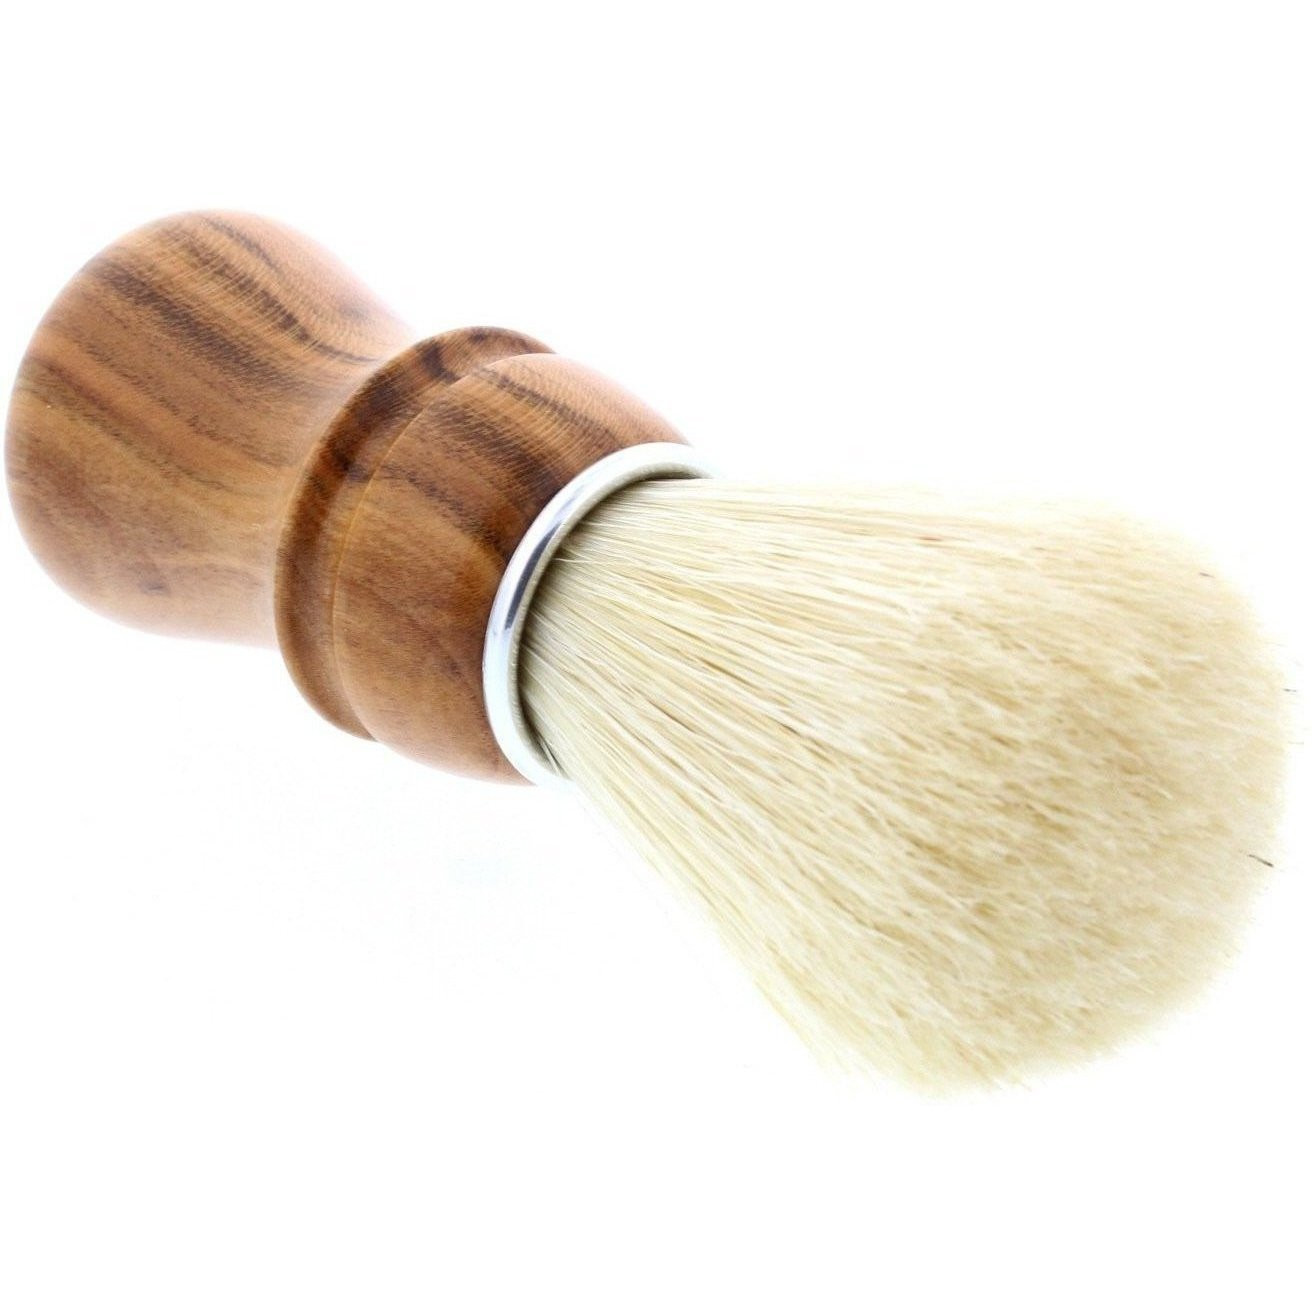 Product image 2 for Semogue Owners Club Pure Bristle Shaving Brush, Cherry Handle